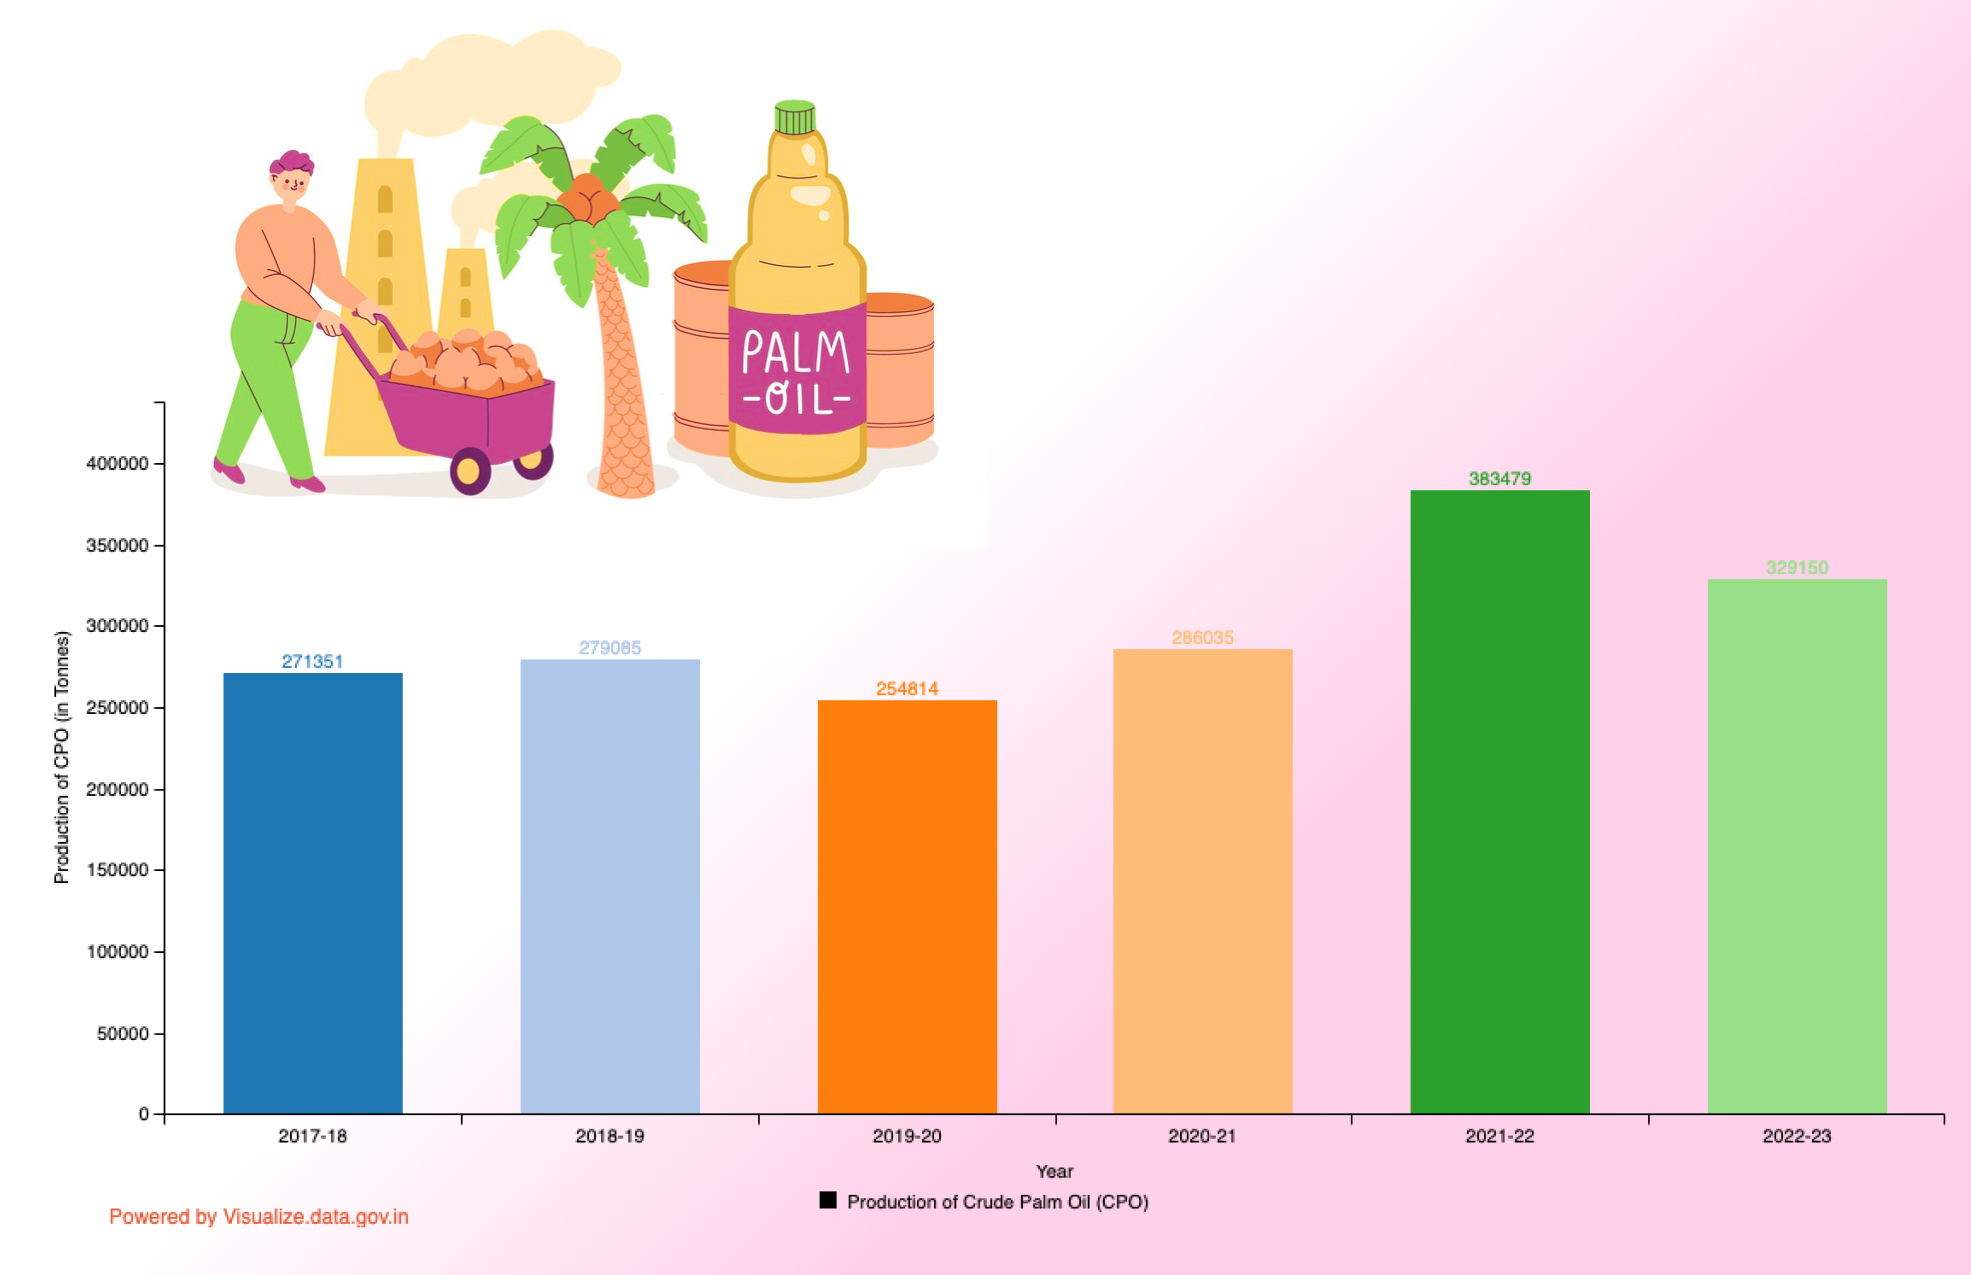 Banner of Year-wise Production of Crude Palm Oil (CPO) from 2017-18 to 2022-23